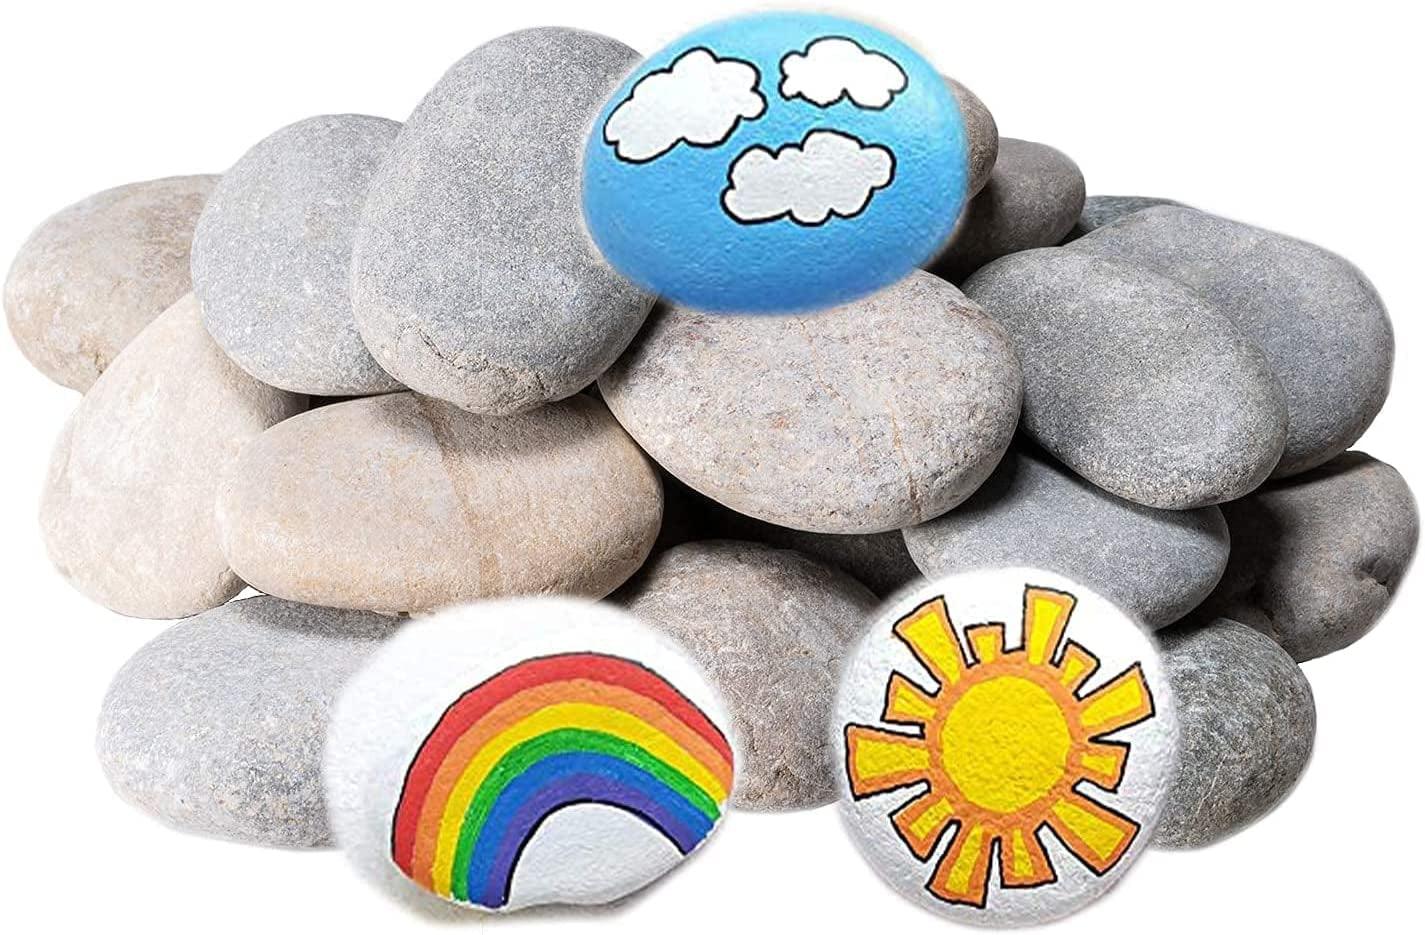 24PCS River Rocks for Painting DIY & Smooth Kindness Rocks for Arts Stone 2-3Inches - WoodArtSupply